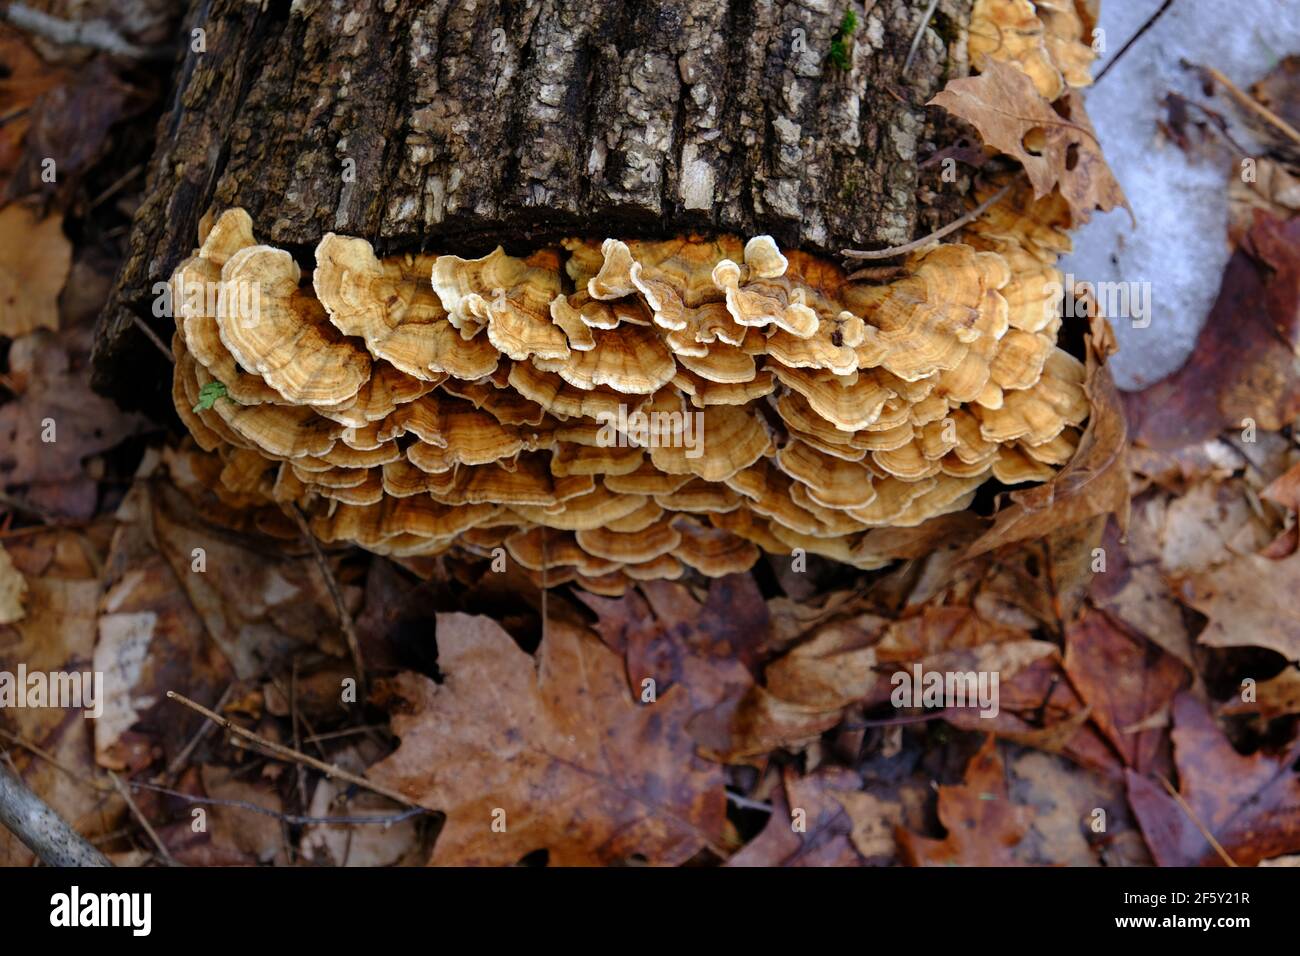 Turkey tail bracket fungus (Trametes versicolor) on the end of a fallen log in early spring in a forest in Quebec, Canada. Stock Photo